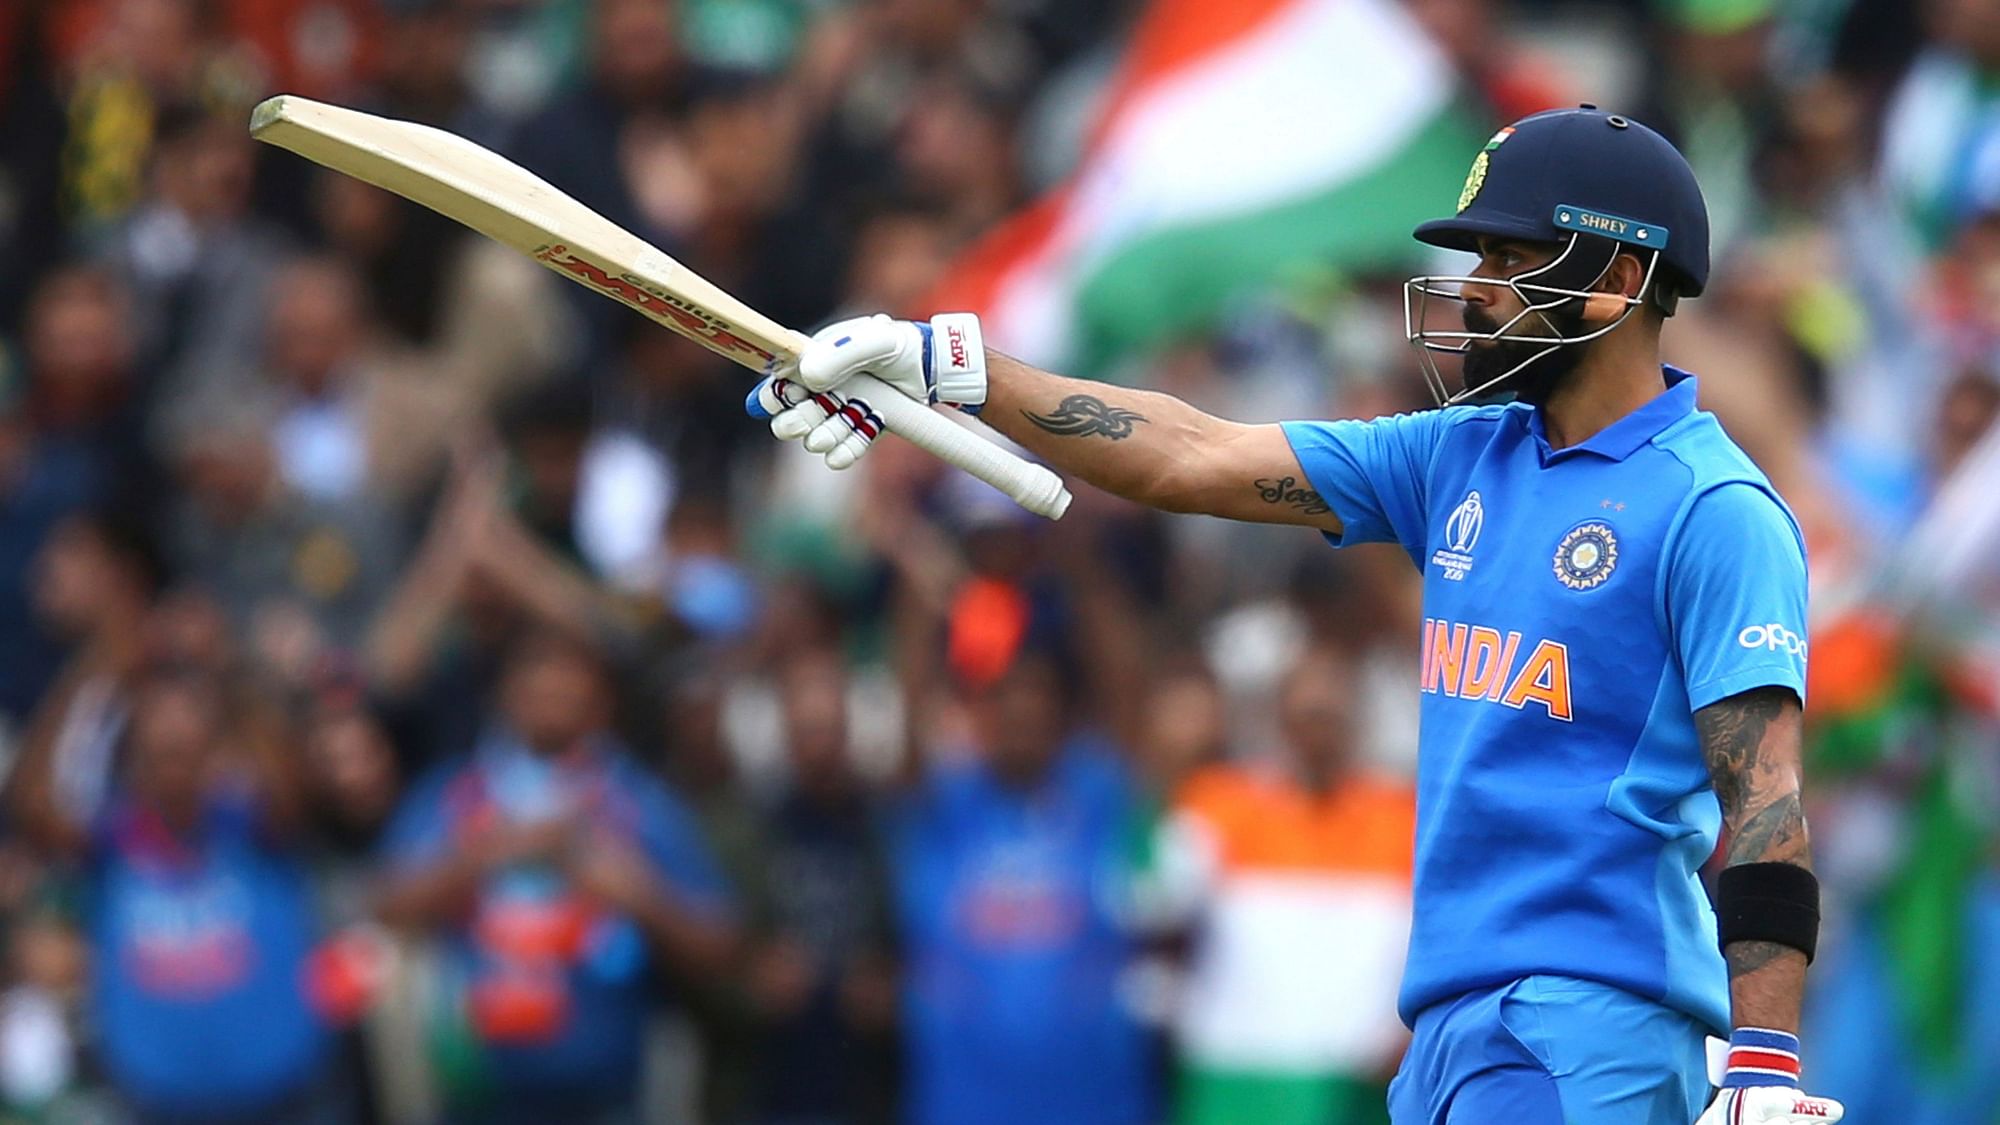 Indian captain Virat Kohli became the fastest batsman to reach the 11,000-run mark in One Day Internationals during India vs Pakistan.